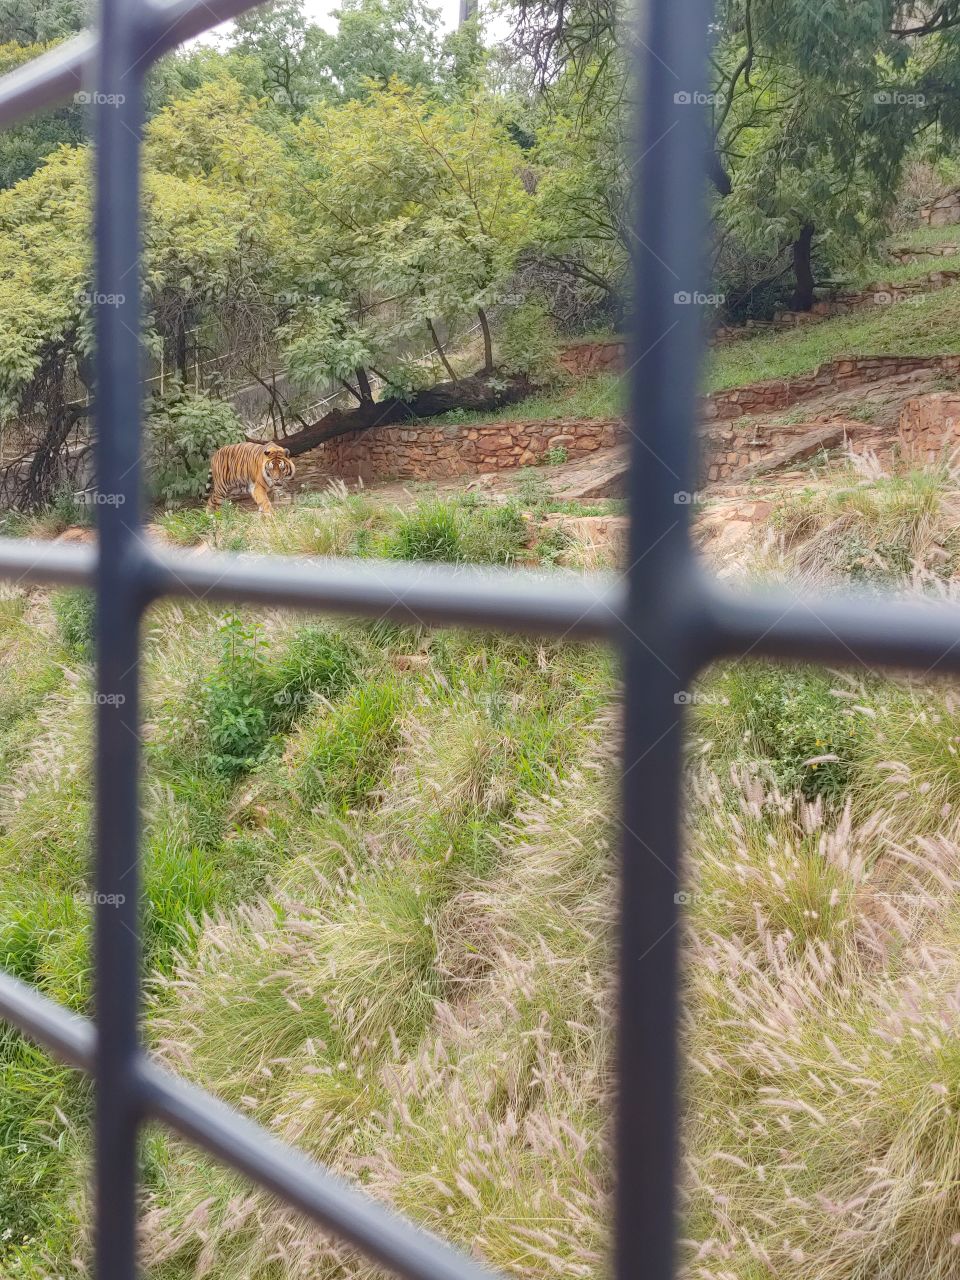 Through a cage, a frustrated tiger can be seen, walking along the only space he has got.